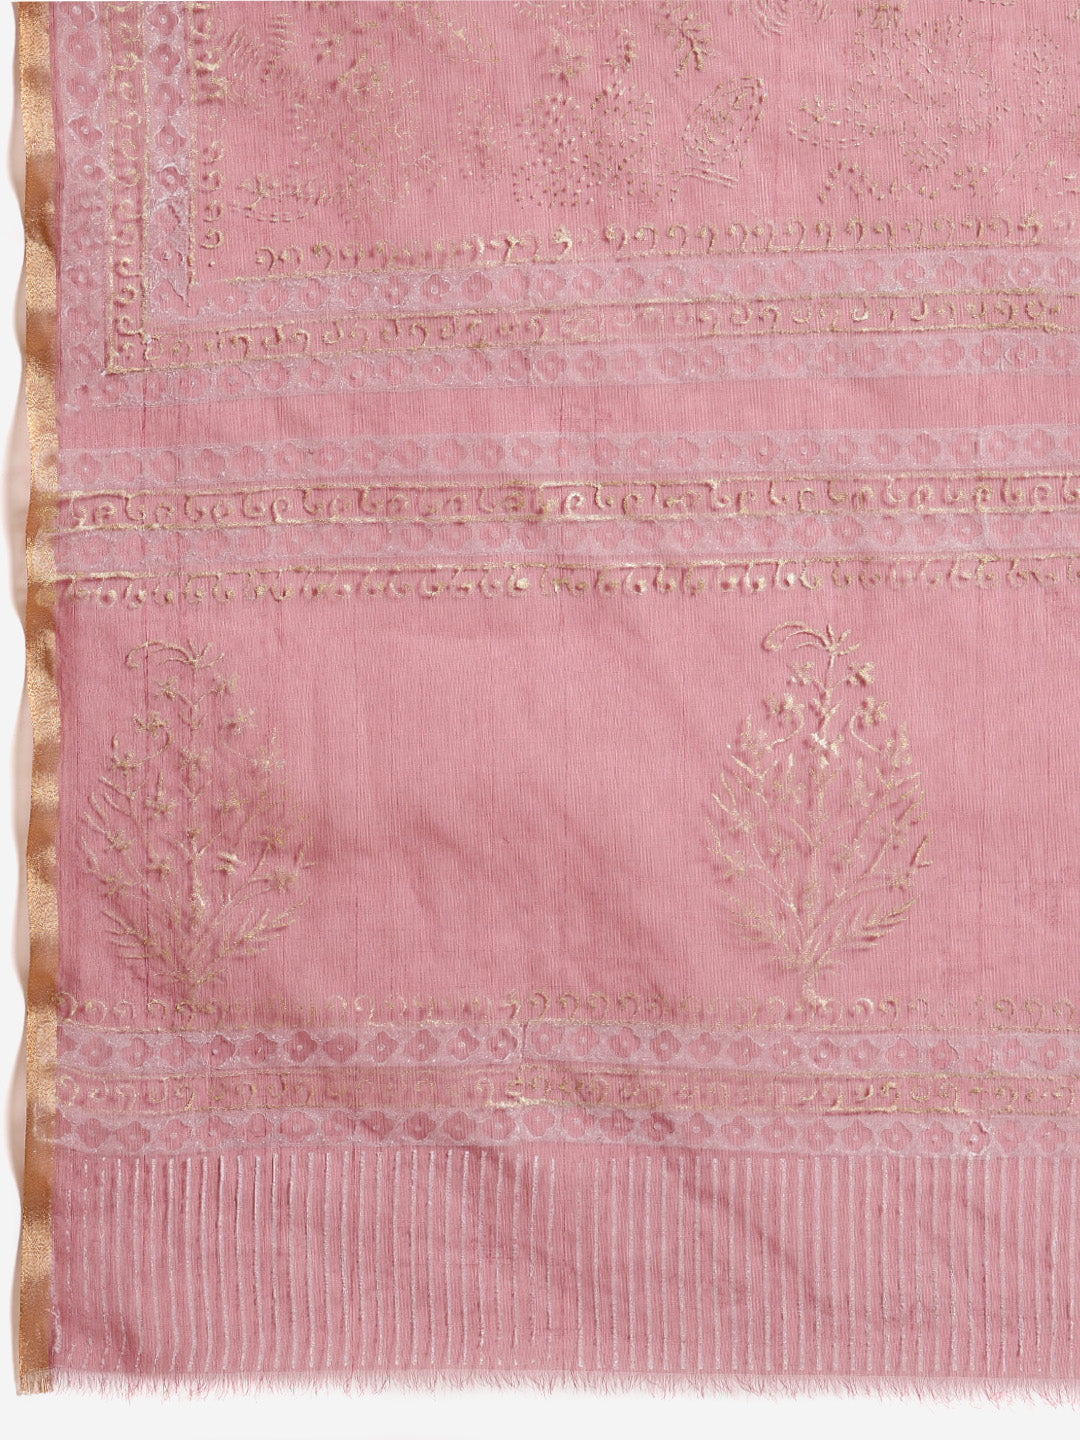 Maroon and , Kalakari India Organza Hand Block Print Saree with blouse BHKPSA0145-Saree-Kalakari India-BHKPSA0145-Geographical Indication, Hand Crafted, Hand Painted, Heritage Prints, Natural Dyes, Organza, Red, Sarees, Sustainable Fabrics, Woven, Yellow-[Linen,Ethnic,wear,Fashionista,Handloom,Handicraft,Indigo,blockprint,block,print,Cotton,Chanderi,Blue, latest,classy,party,bollywood,trendy,summer,style,traditional,formal,elegant,unique,style,hand,block,print, dabu,booti,gift,present,glamorous,